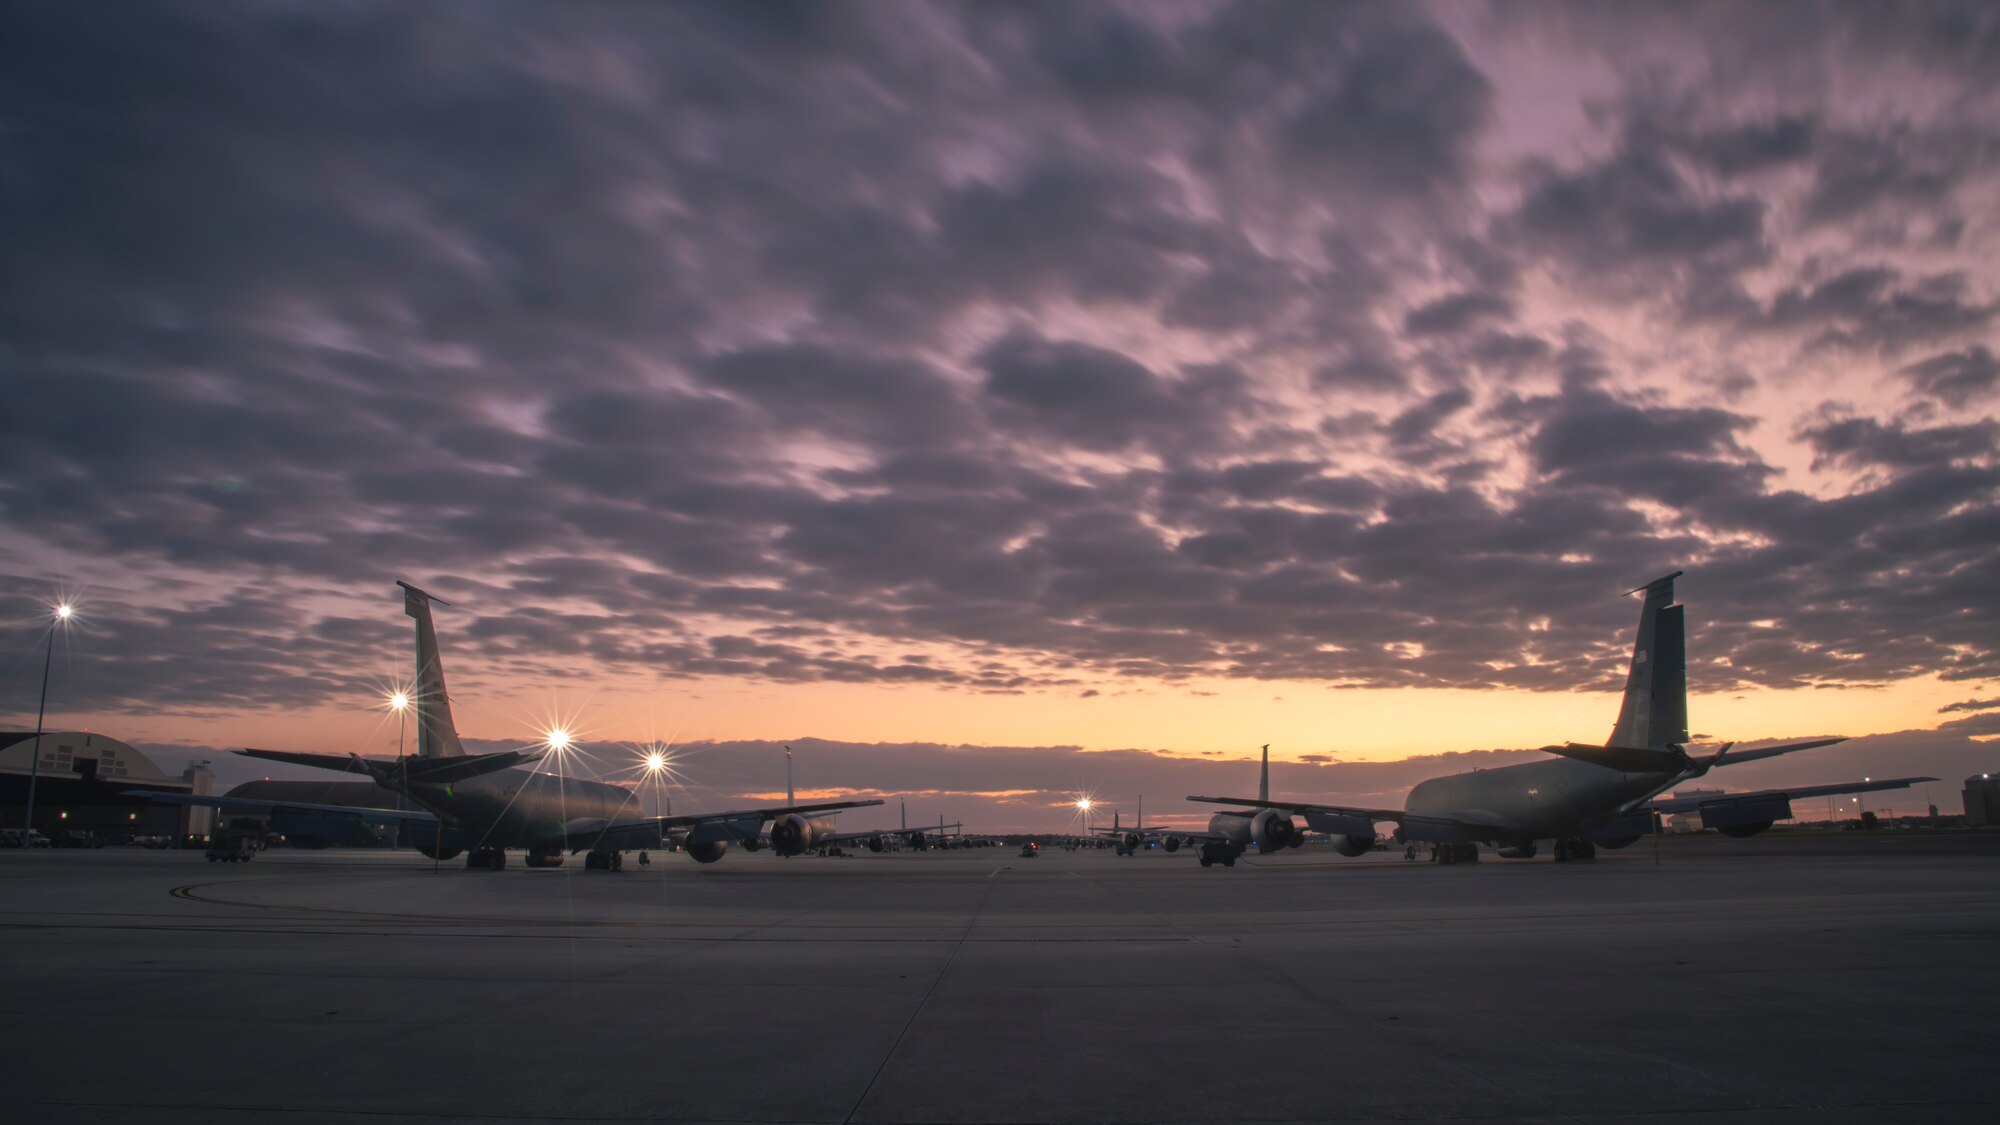 The refueling capabilities of the KC-135 enable the air assets of the Defense Department and partner nations to travel freely without the need of a safe haven on land.